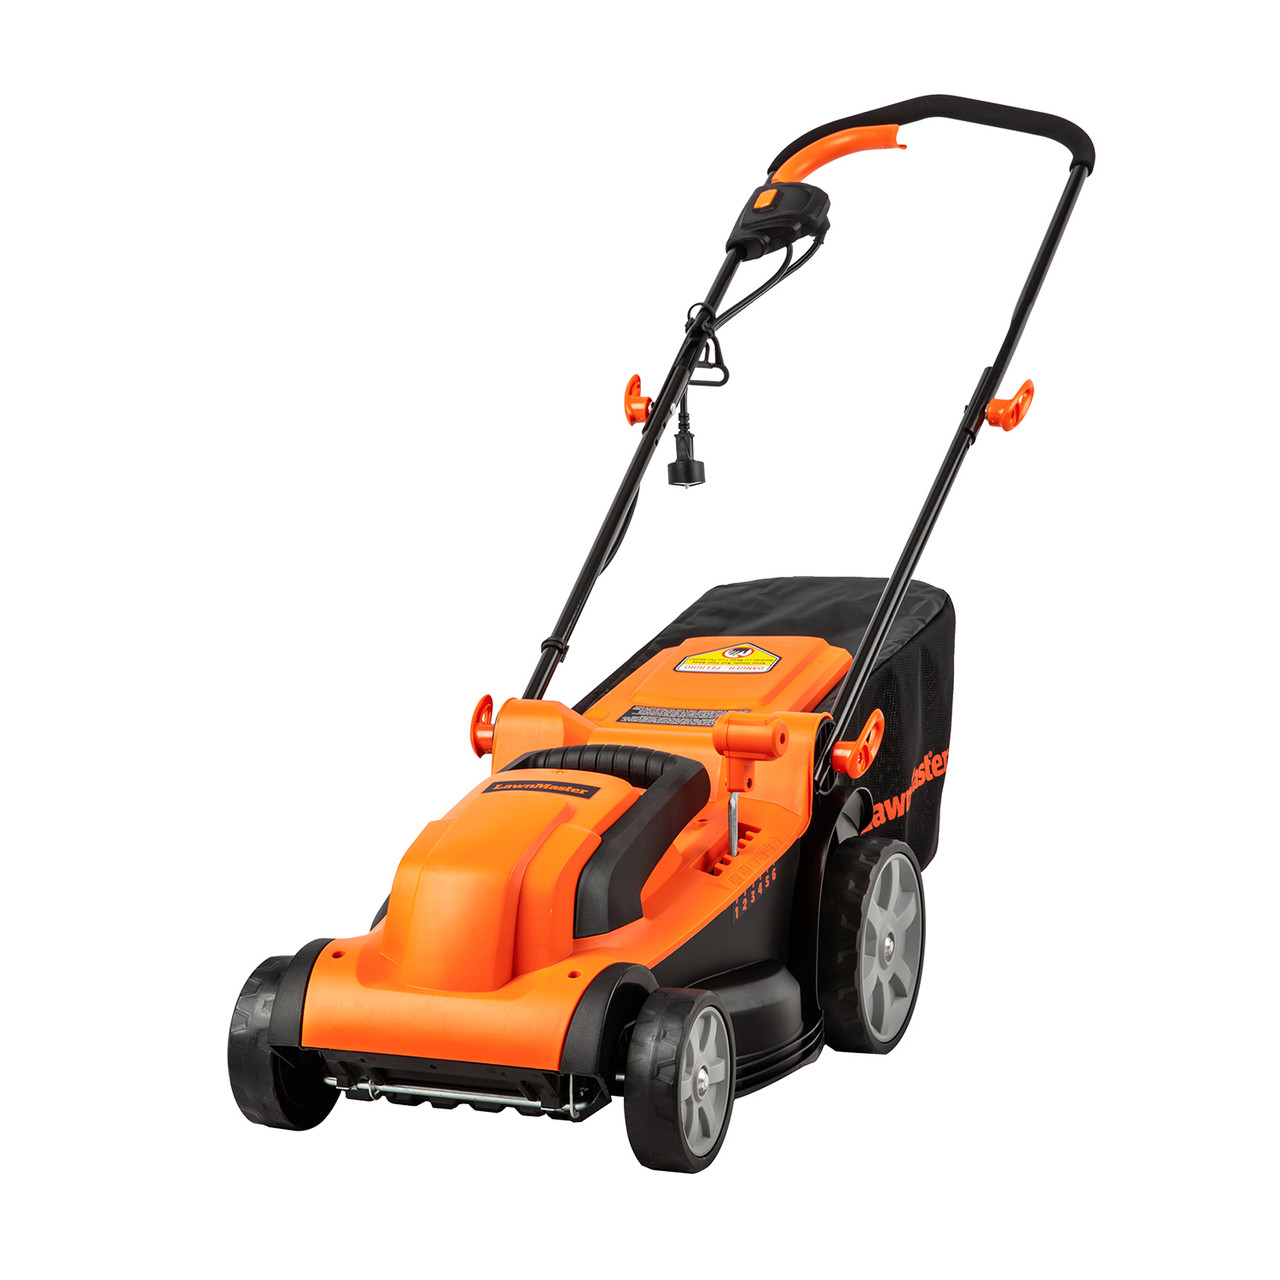 BLACK & DECKER 12-Amp 20-in Corded Lawn Mower in the Corded